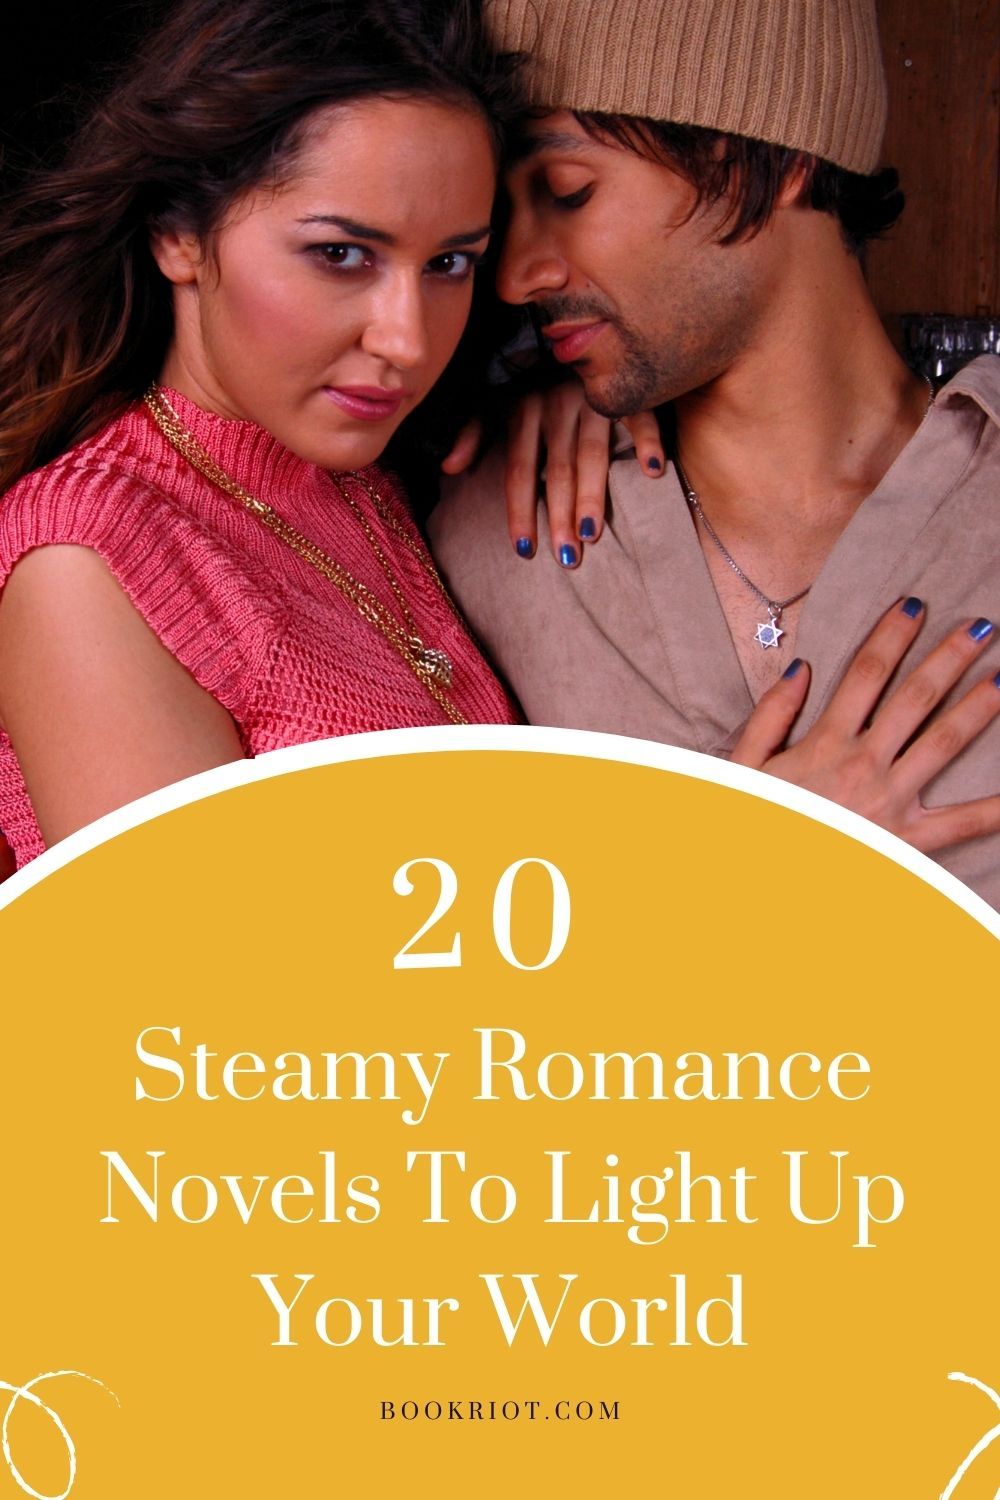 20 Steamy Romance Novels That Will Light Up Your World